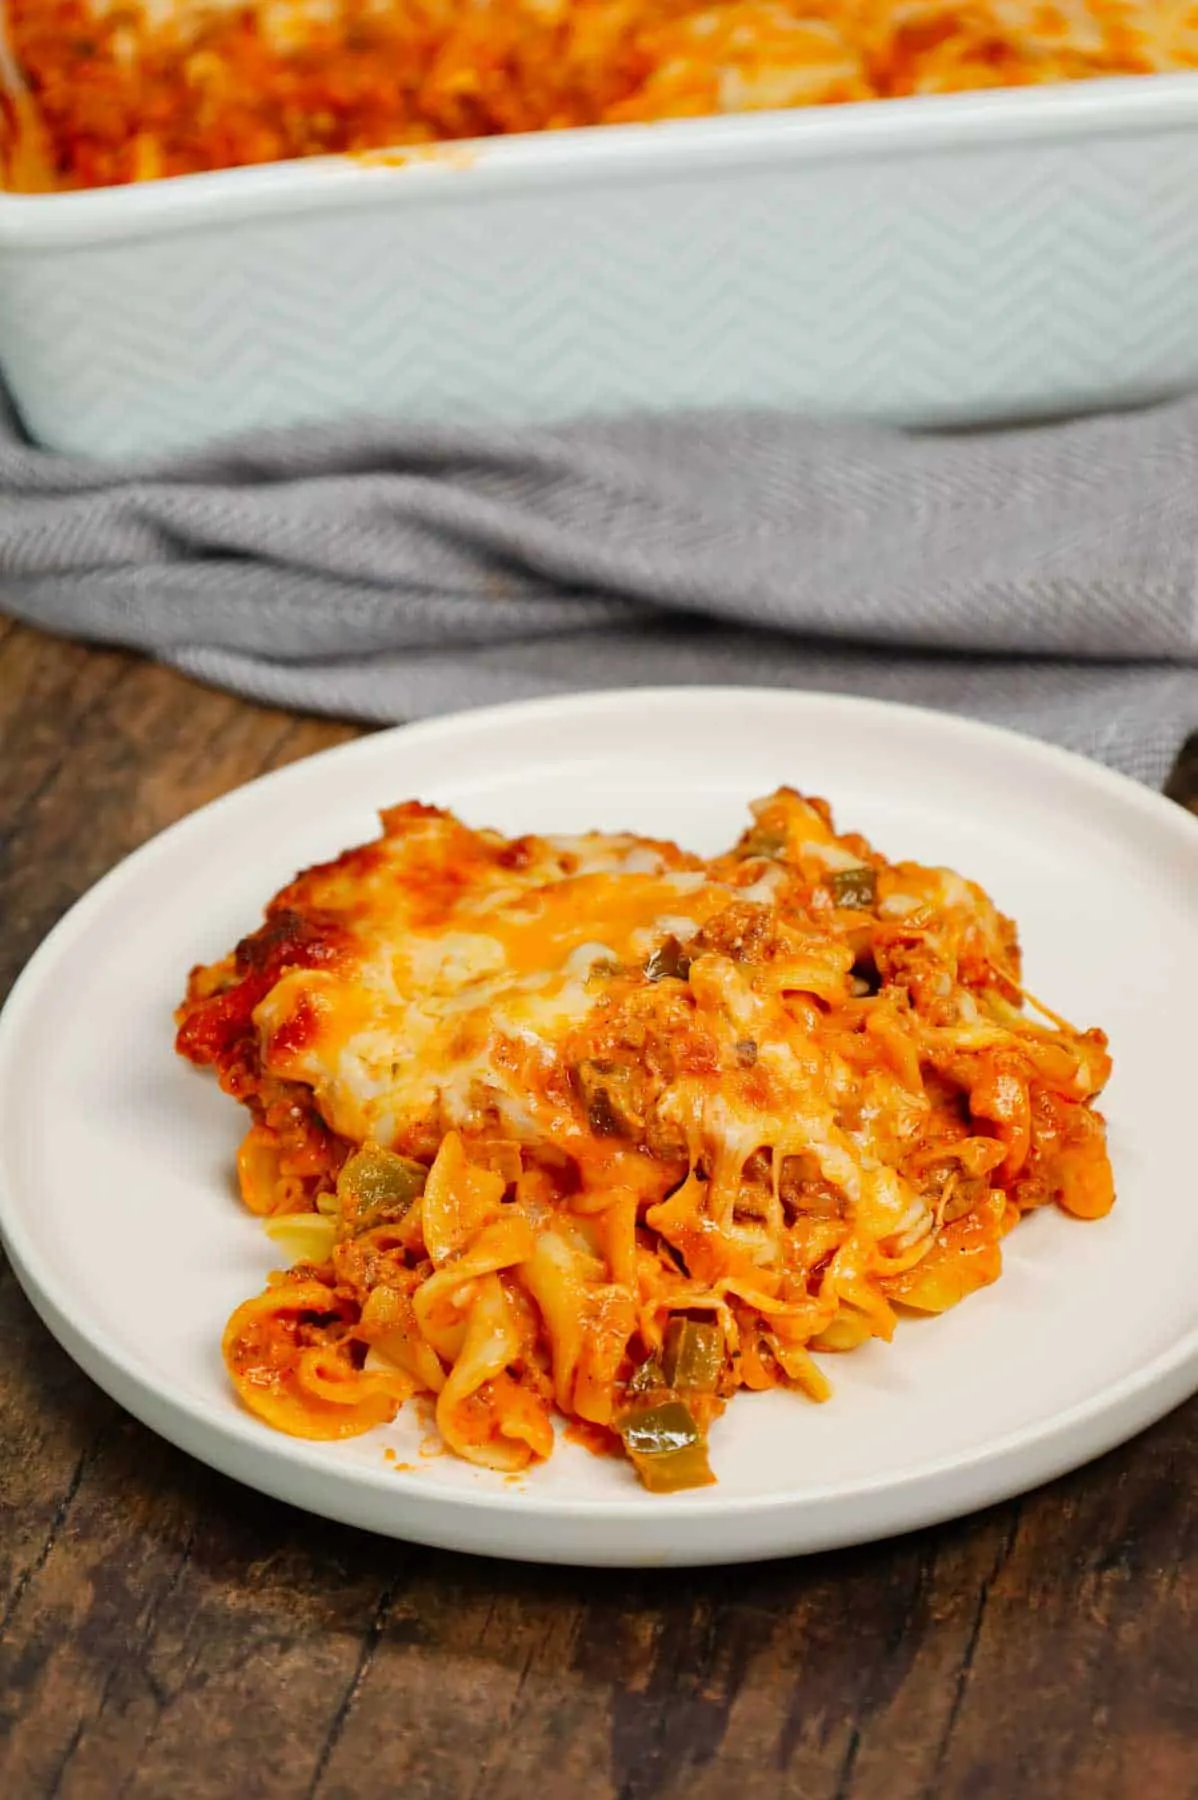 Grandma's Ground Beef Casserole is a simple and classic hamburger dish made with egg noodles, condensed tomato soup, onions, green bell peppers and cream cheese all baked with shredded mozzarella and cheddar on top.